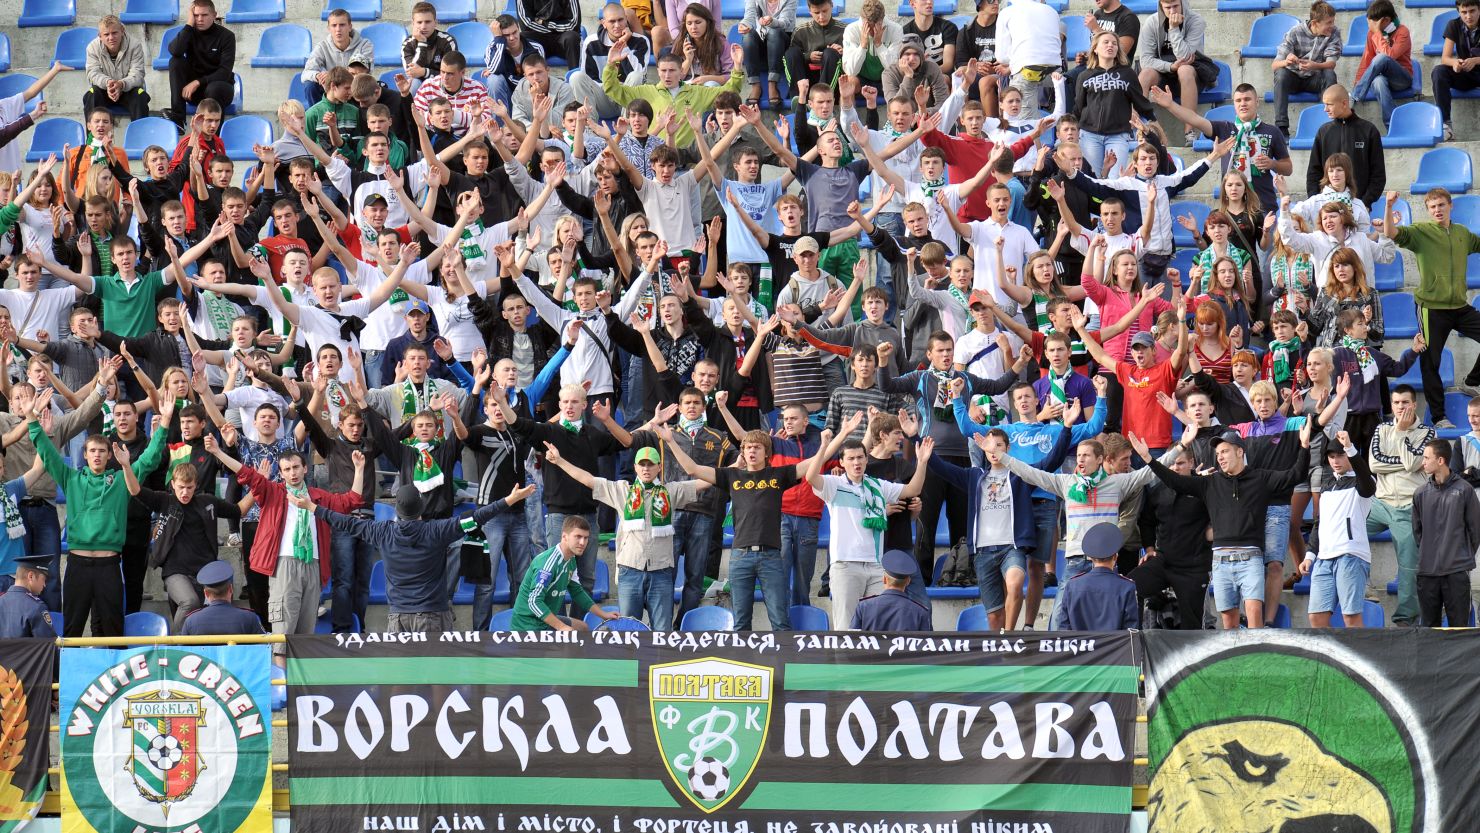 The spotlight is on Ukrainian and Polish fans after a BBC investigation alleged racism was prevalent in the stands